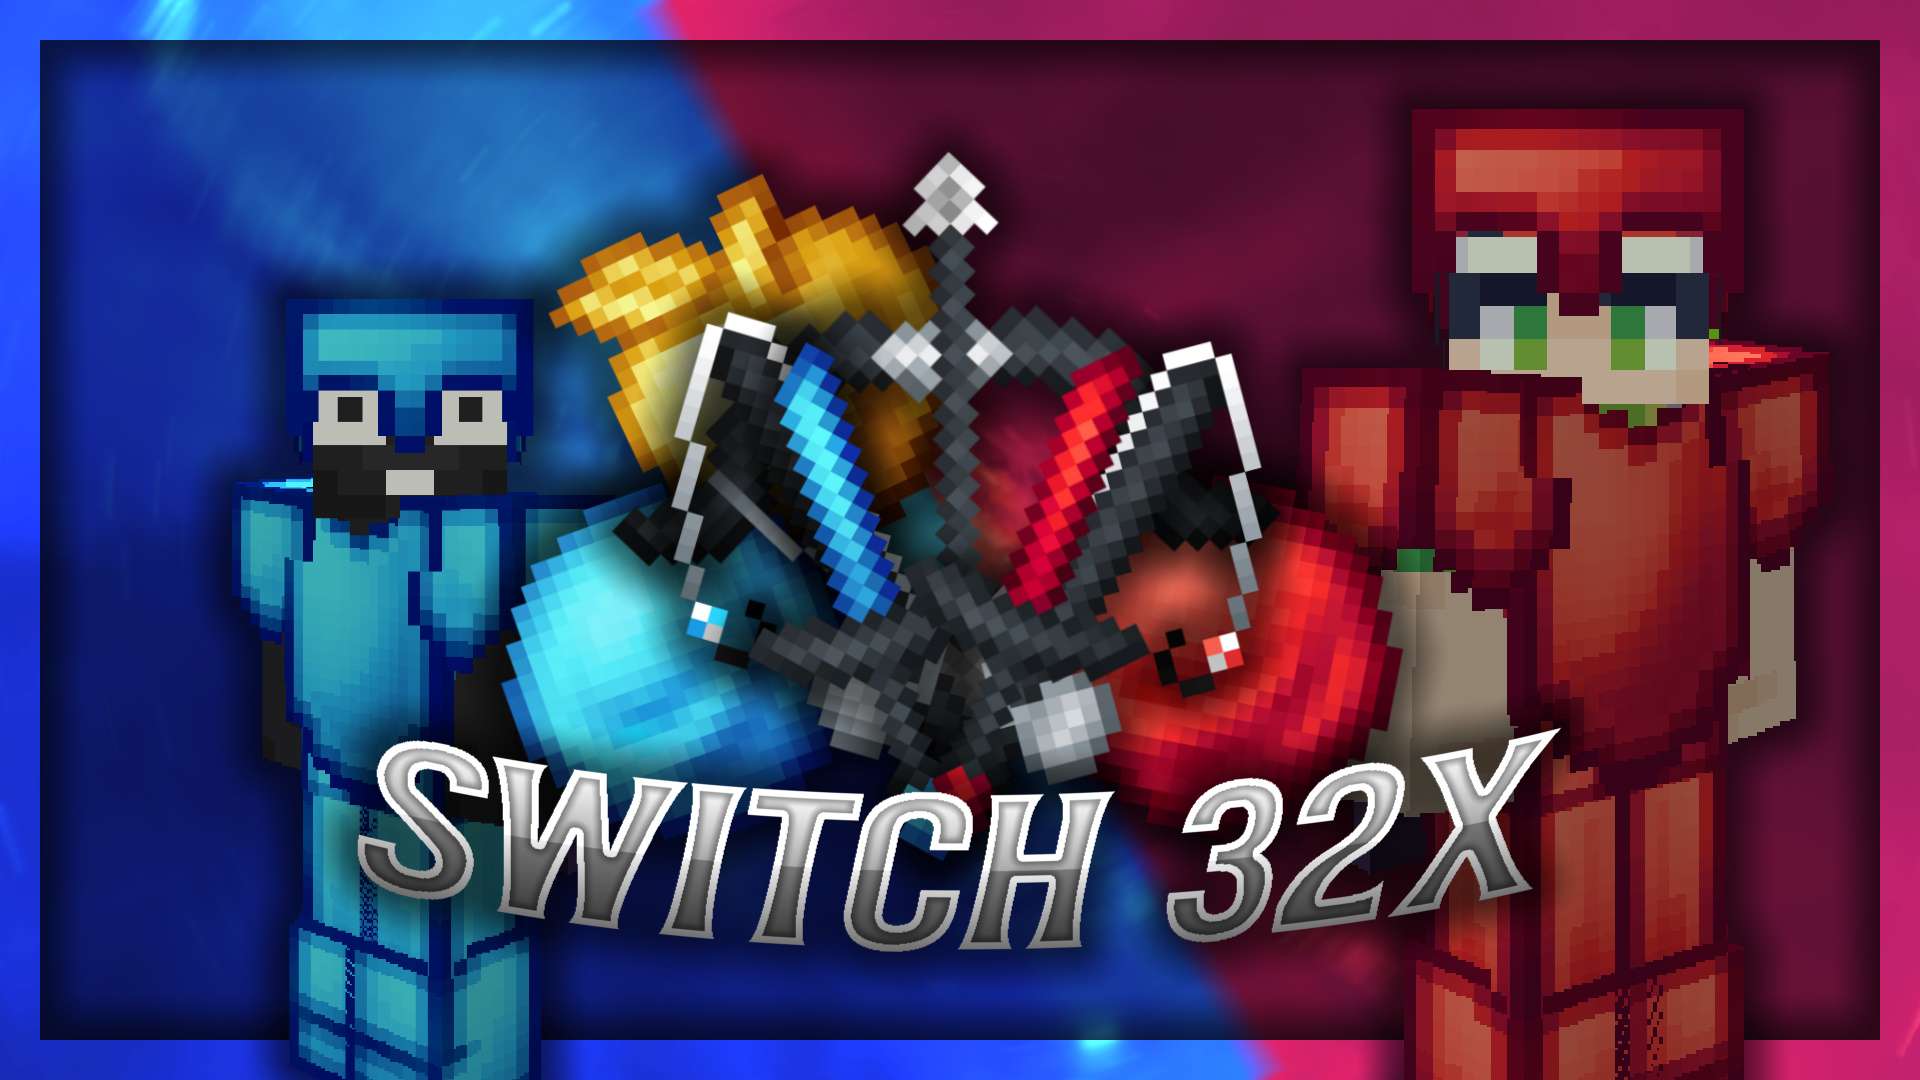 Switch 32x by Mek & eymoses on PvPRP